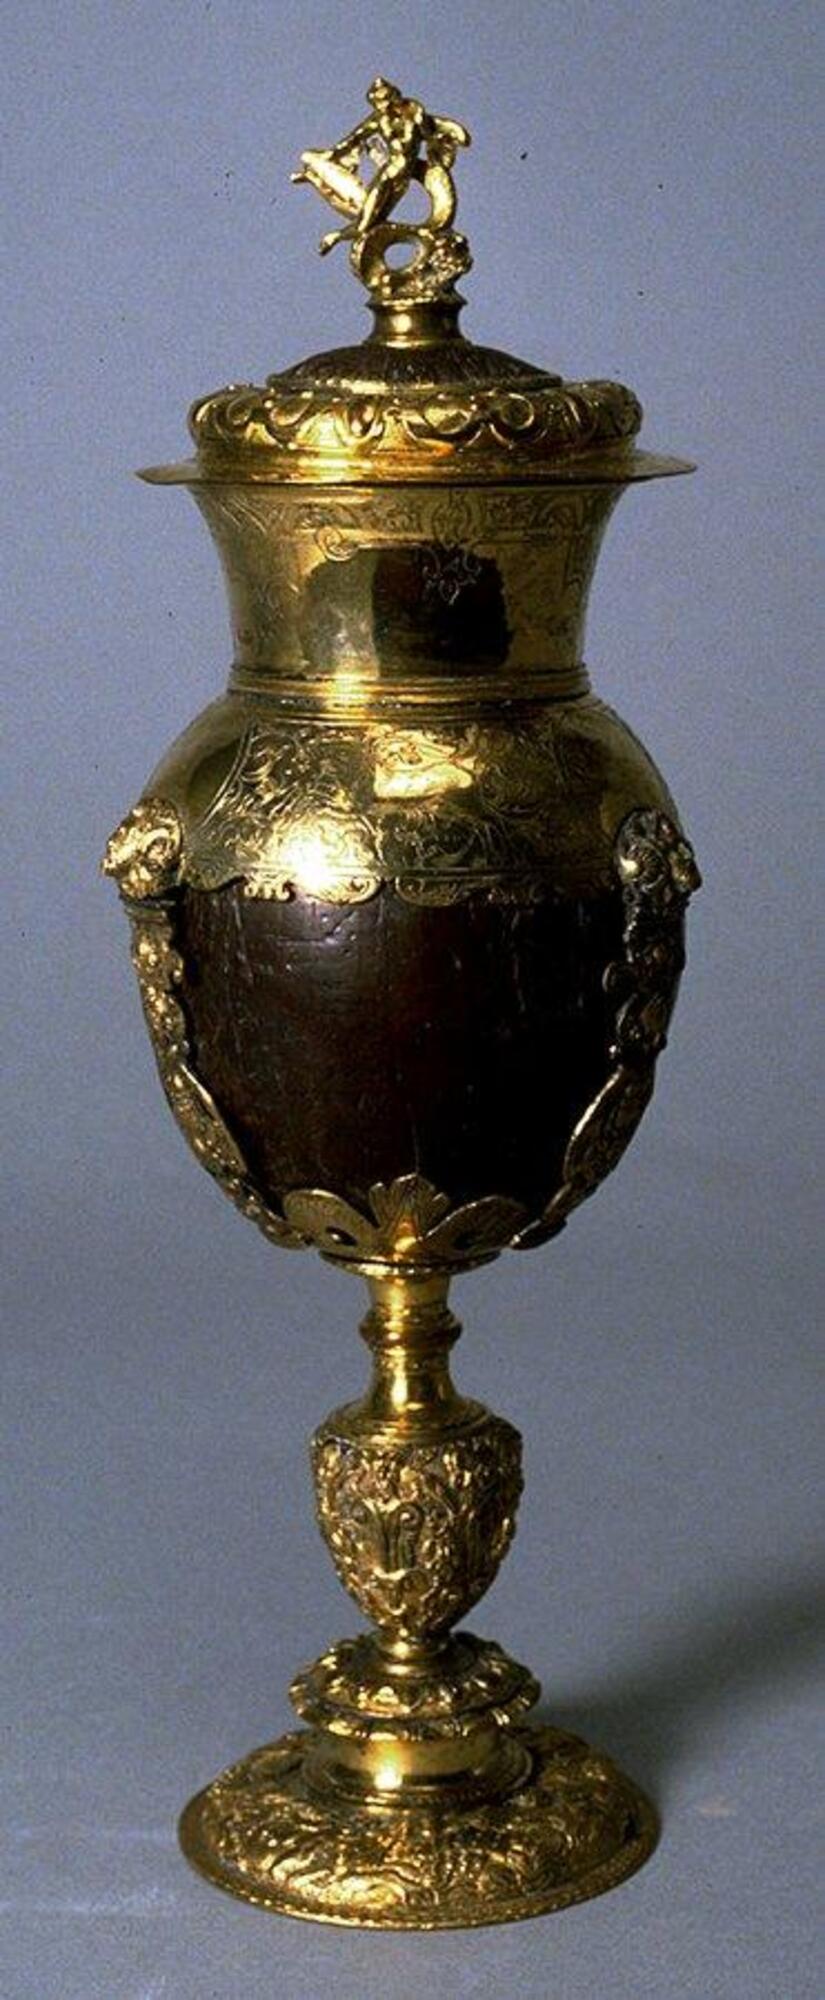 This cup is fashioned from a coconut shell set in a shallow bowl supported on a long, narrow stem and held in place by three straps and a tall neck band. The shallow domed lid has a plain, overhanging rim and terminates in a finial with a statuette of a nude sea nymph and serpent. The metalwork is densely decorated with various masks, animals, fantastic creatures, and vegetal ornament.